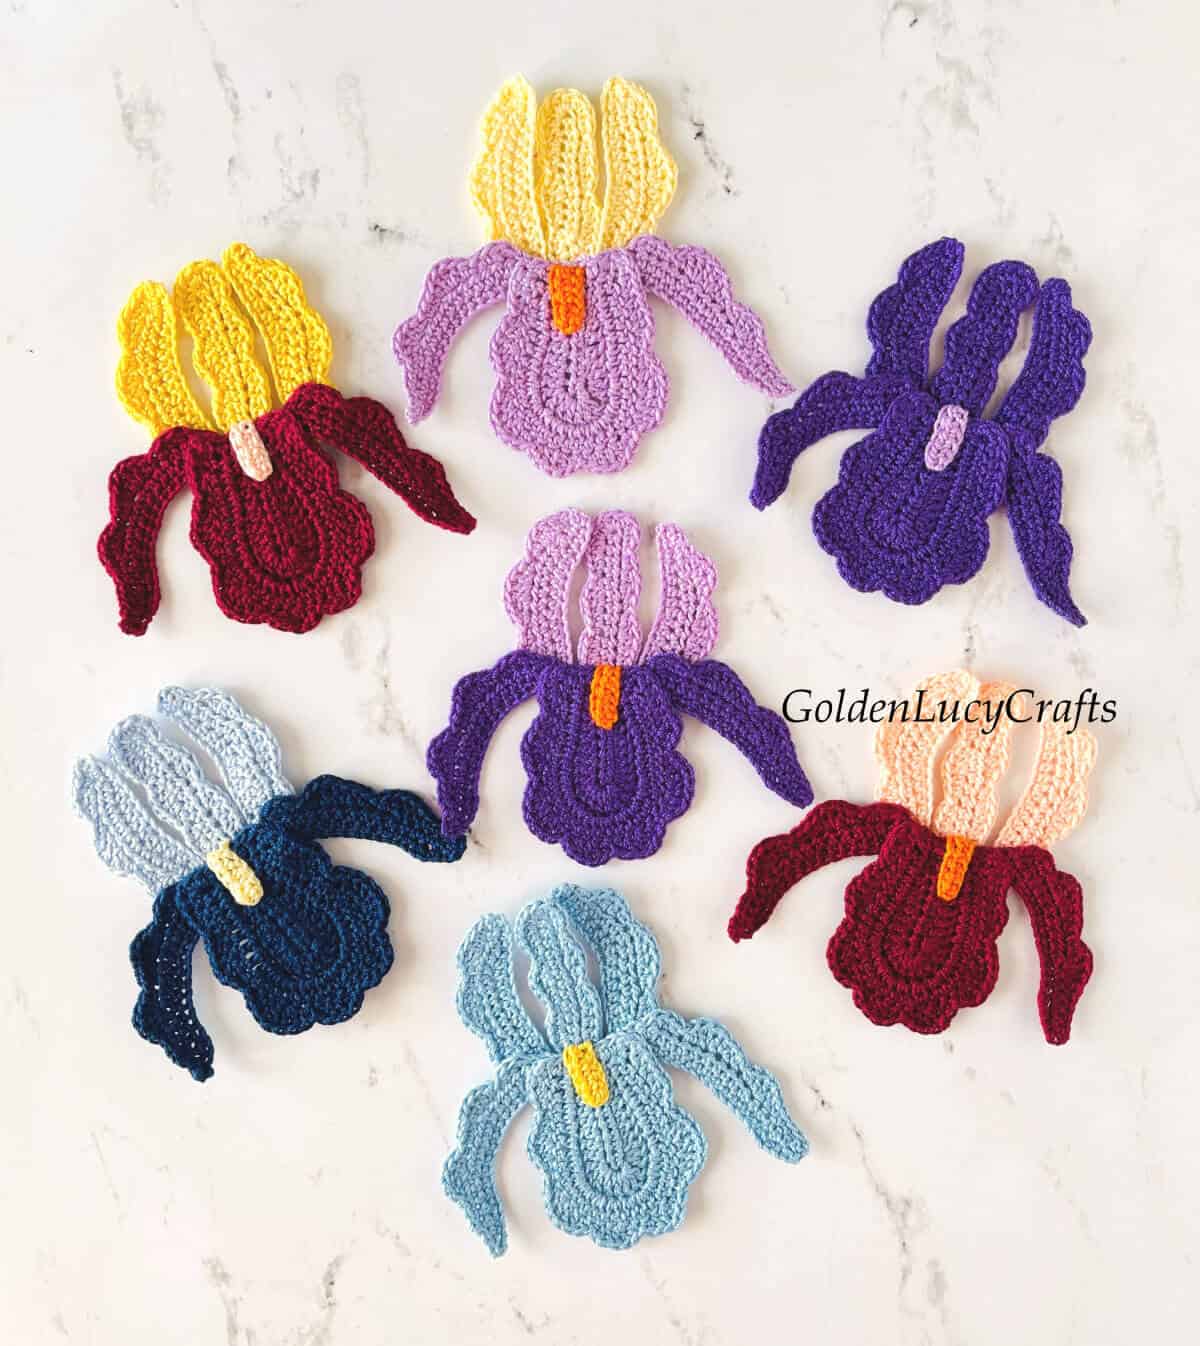 Seven crocheted iris appliques in different colors.